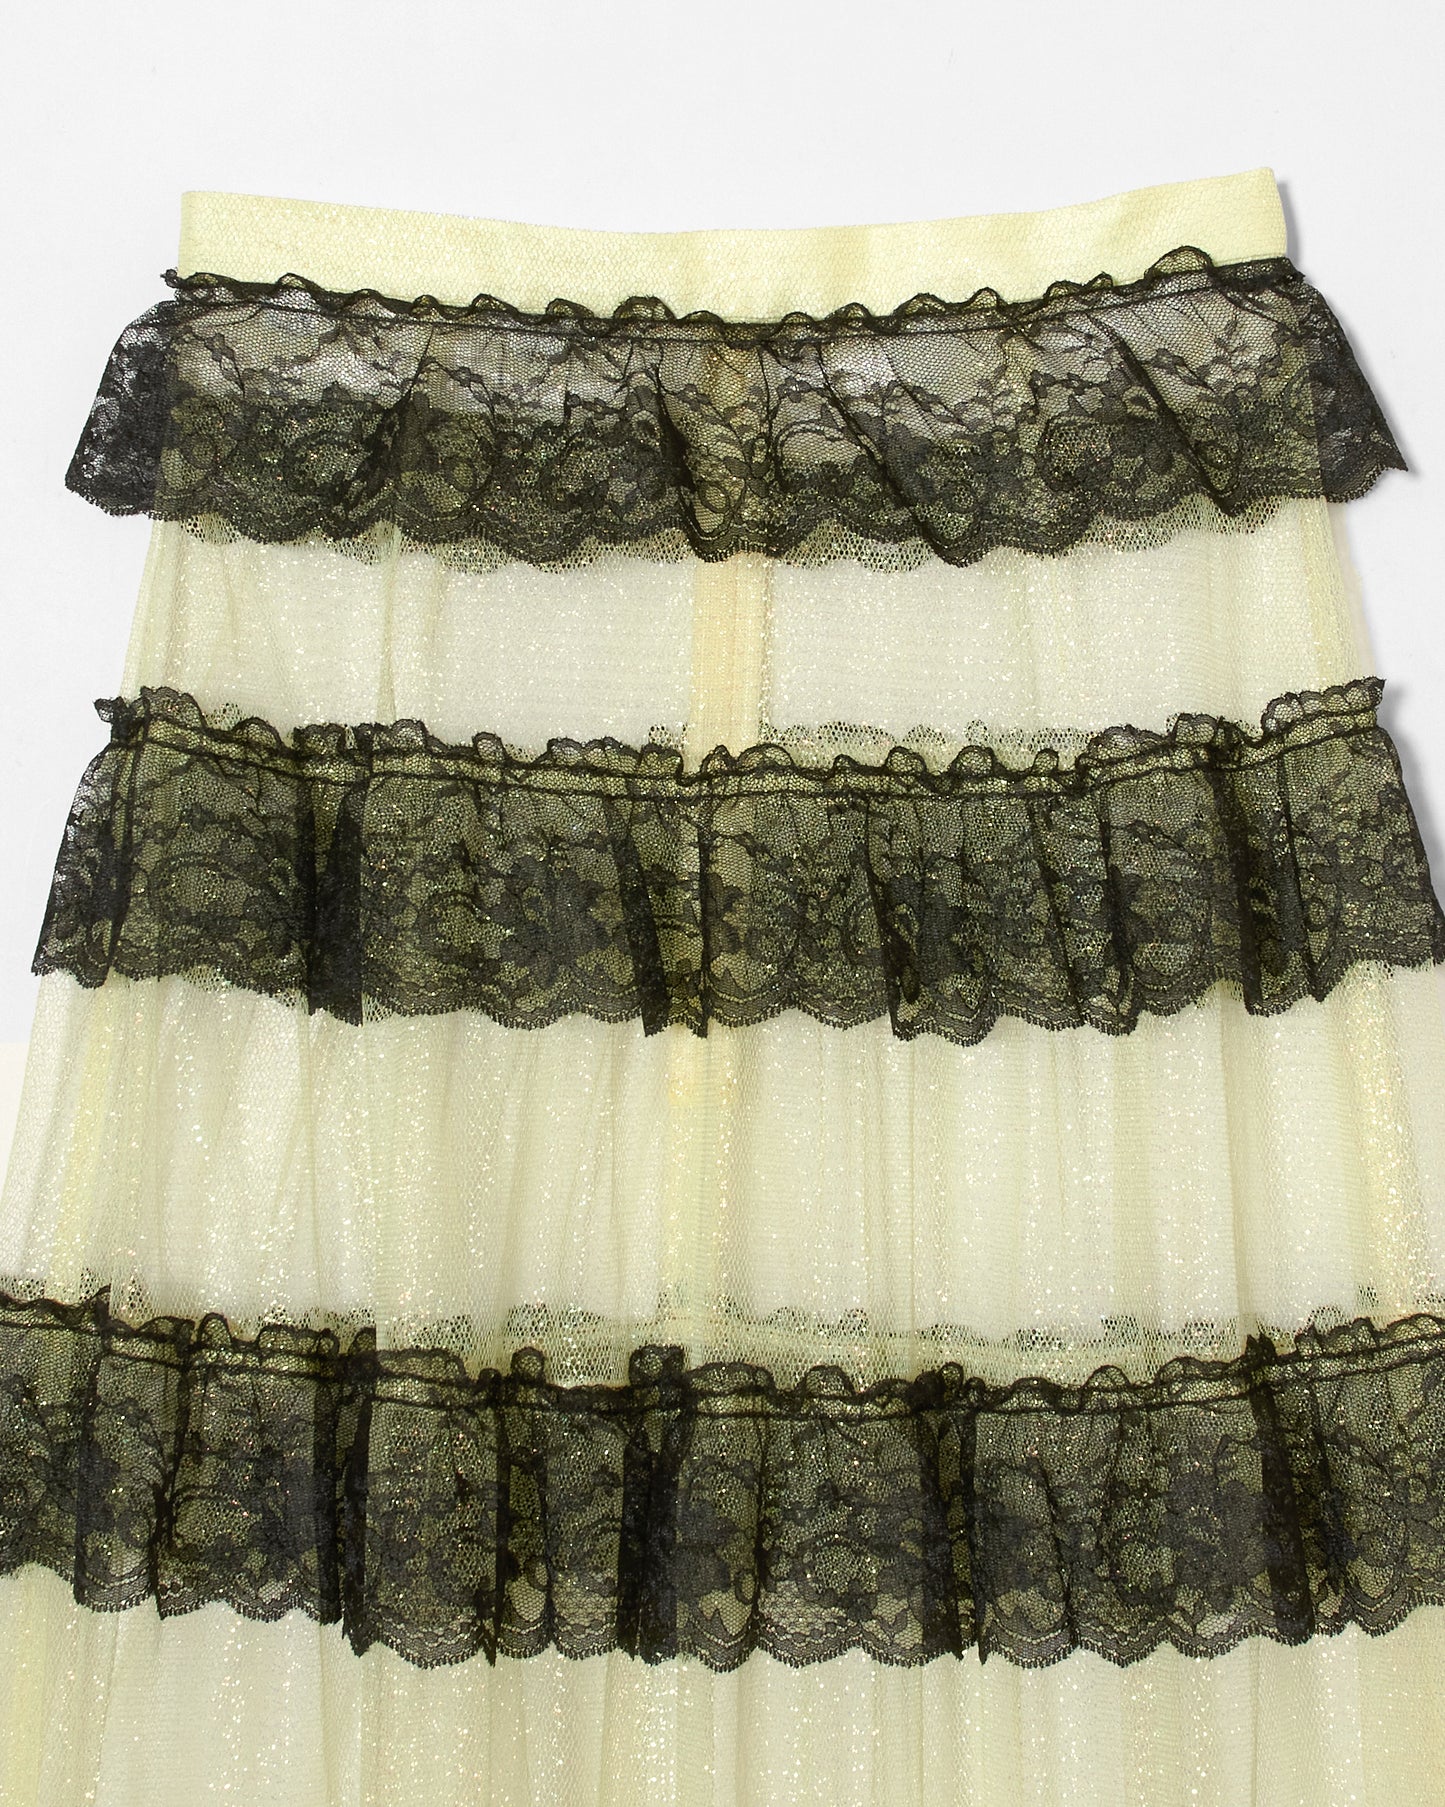 black lace yellow skirt【Delivery in August 2023】